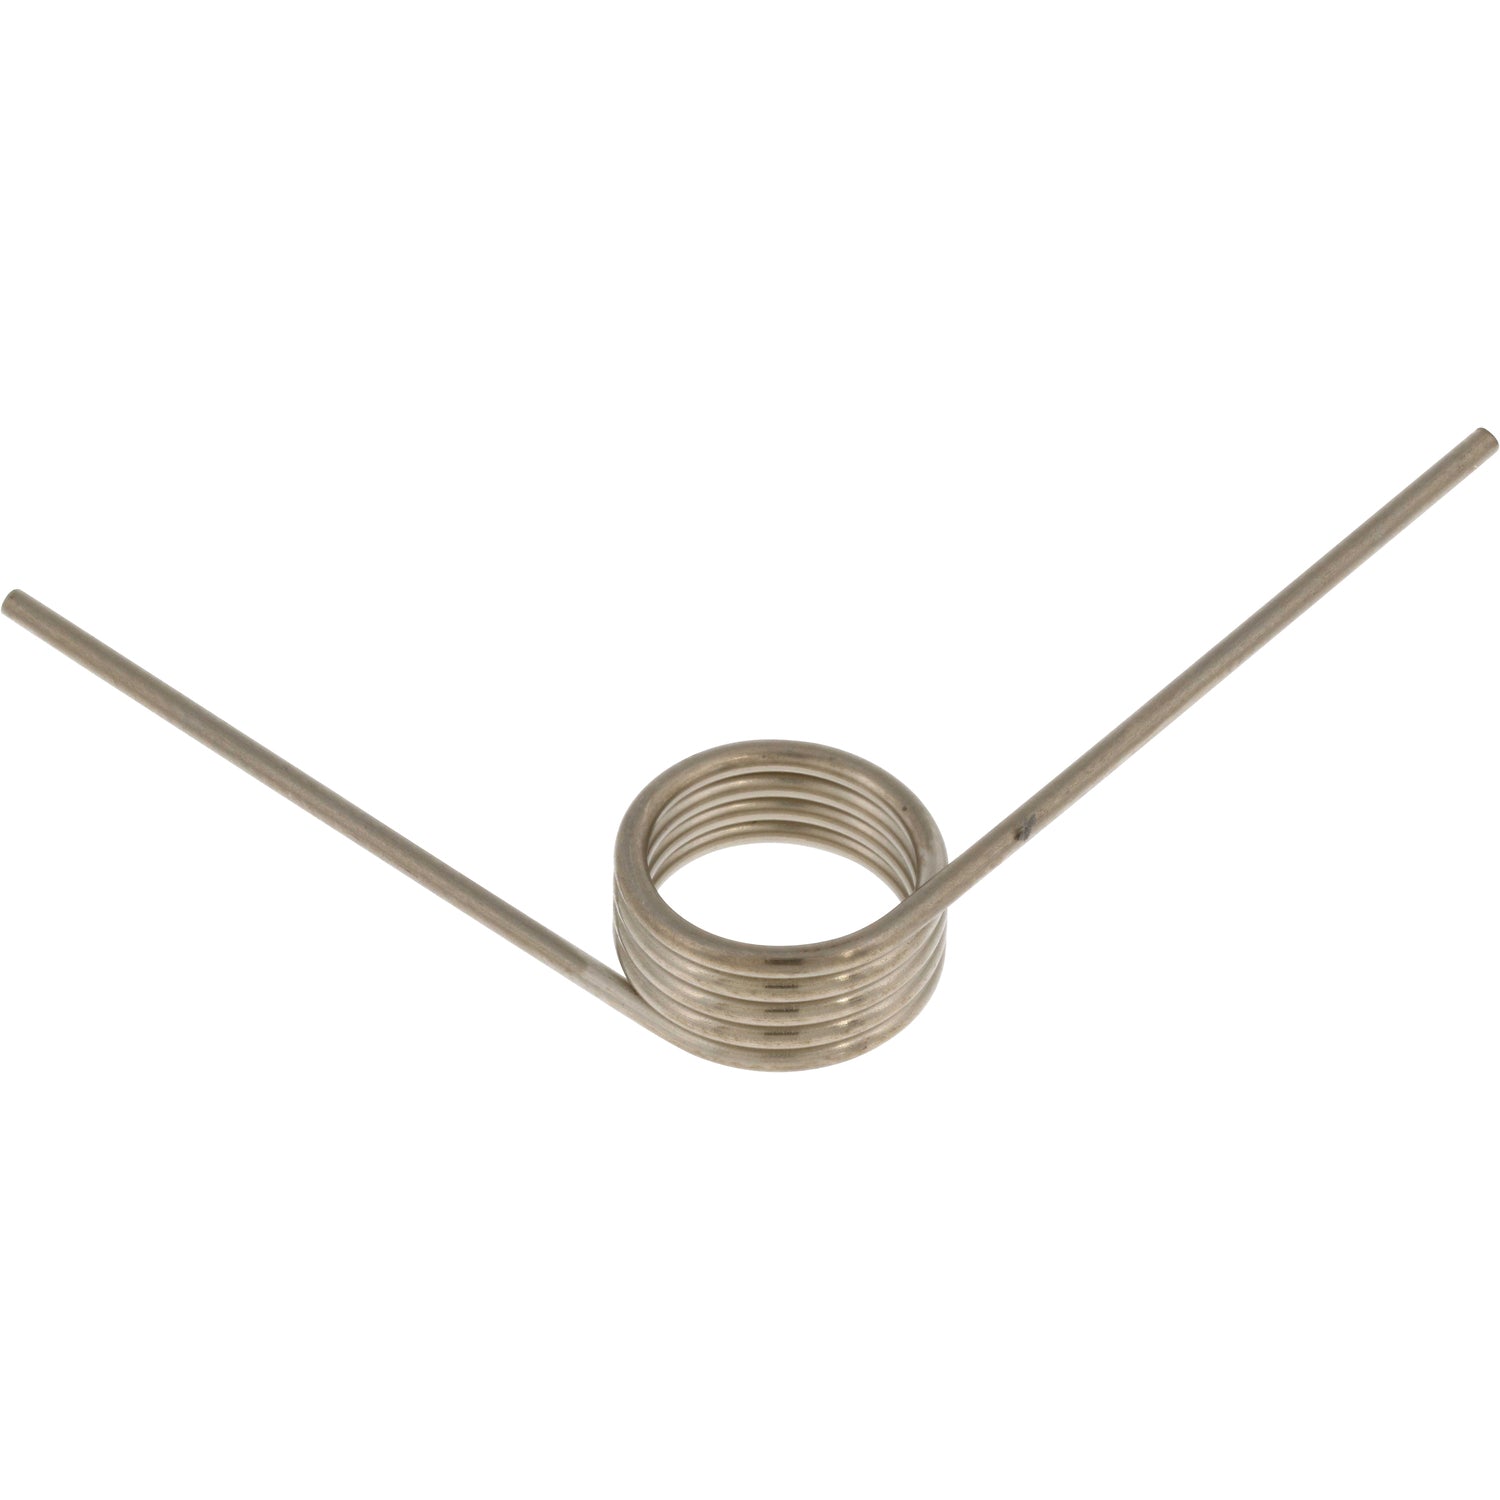 302 stainless steel torsion spring on white back ground. 90 Degree right hand wound. 9287K236